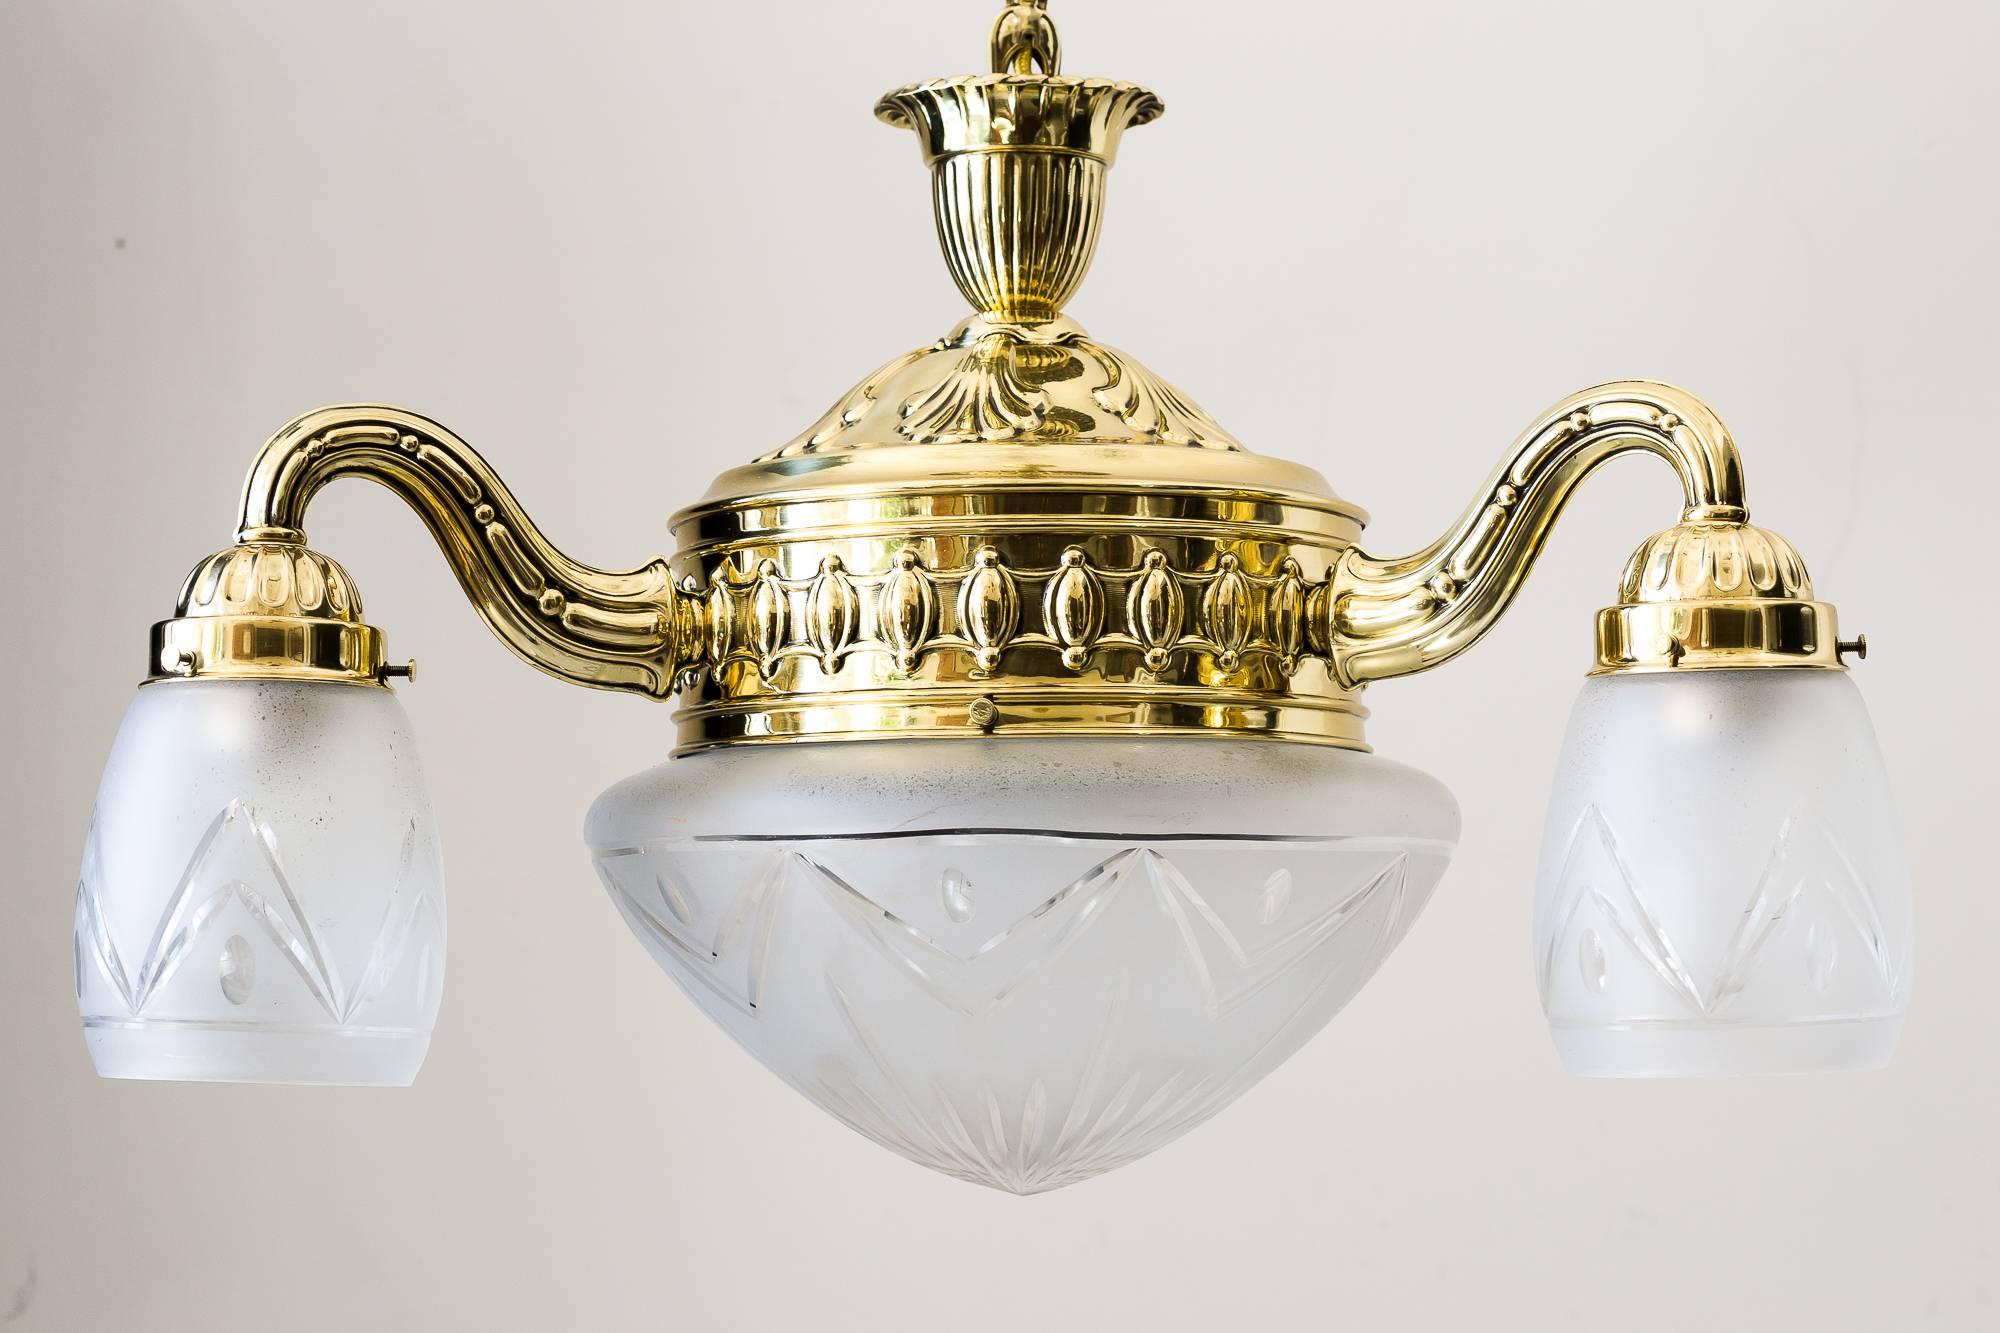 Historistic chandelier, circa 1890s
polished and stove enameled.